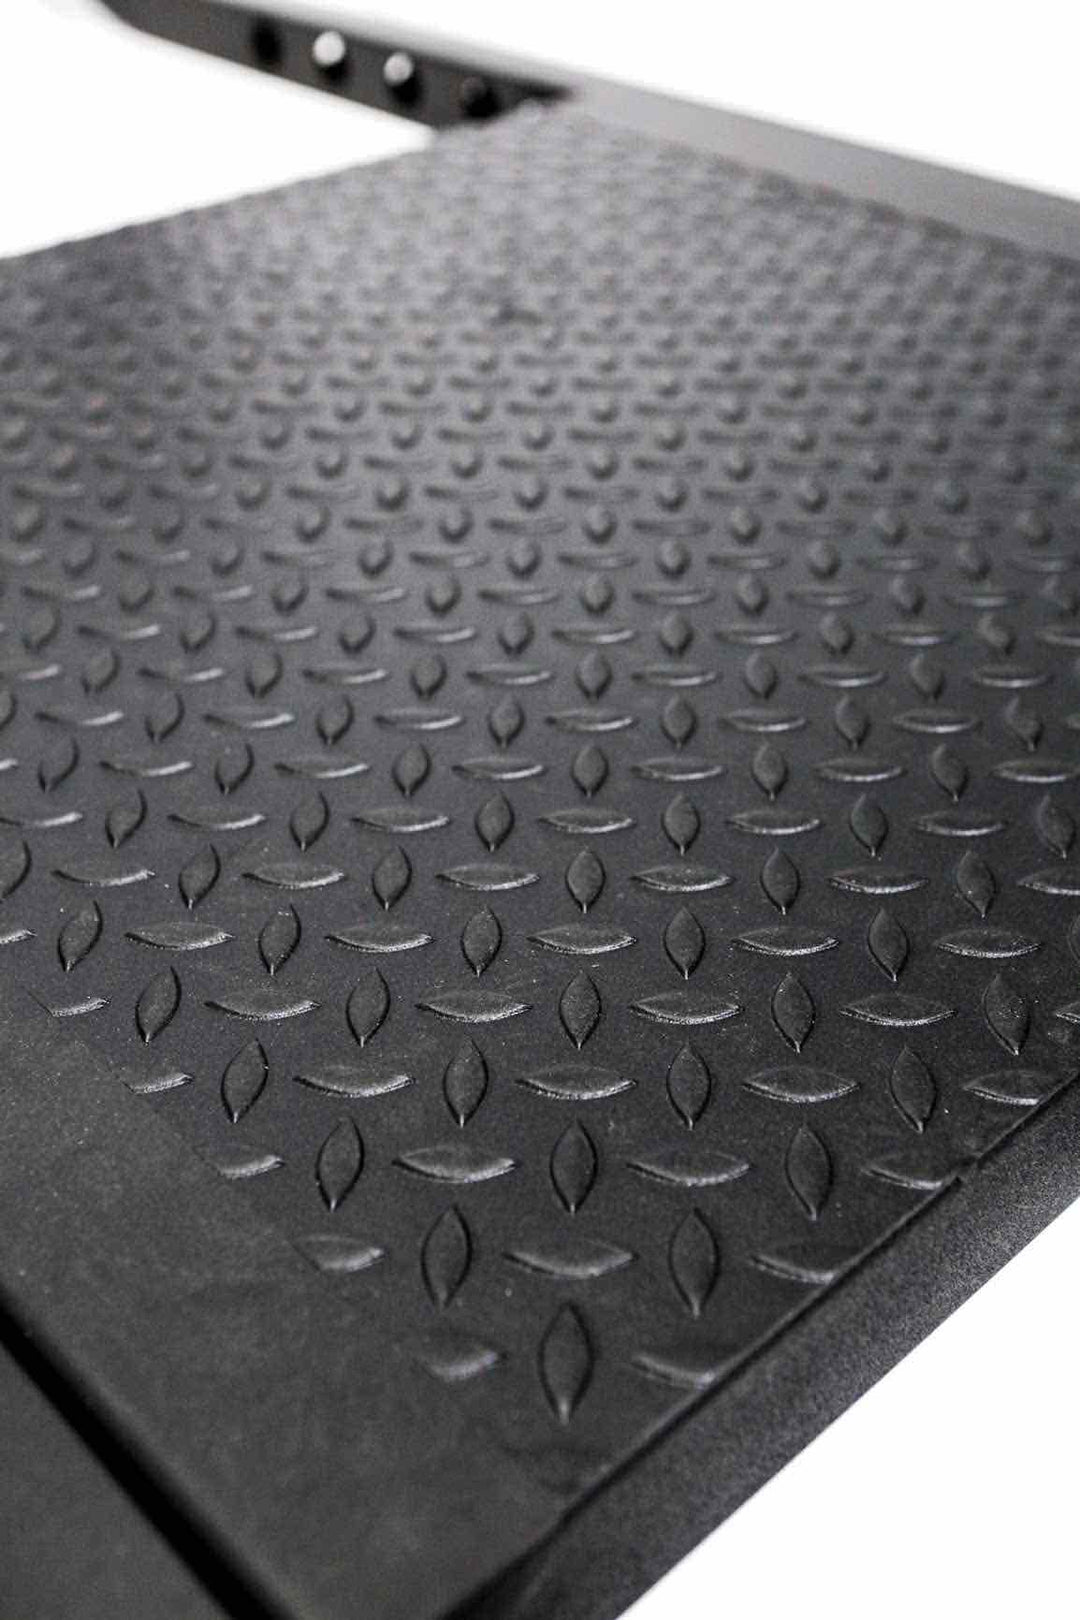 Black steel foot plate with rigid surface